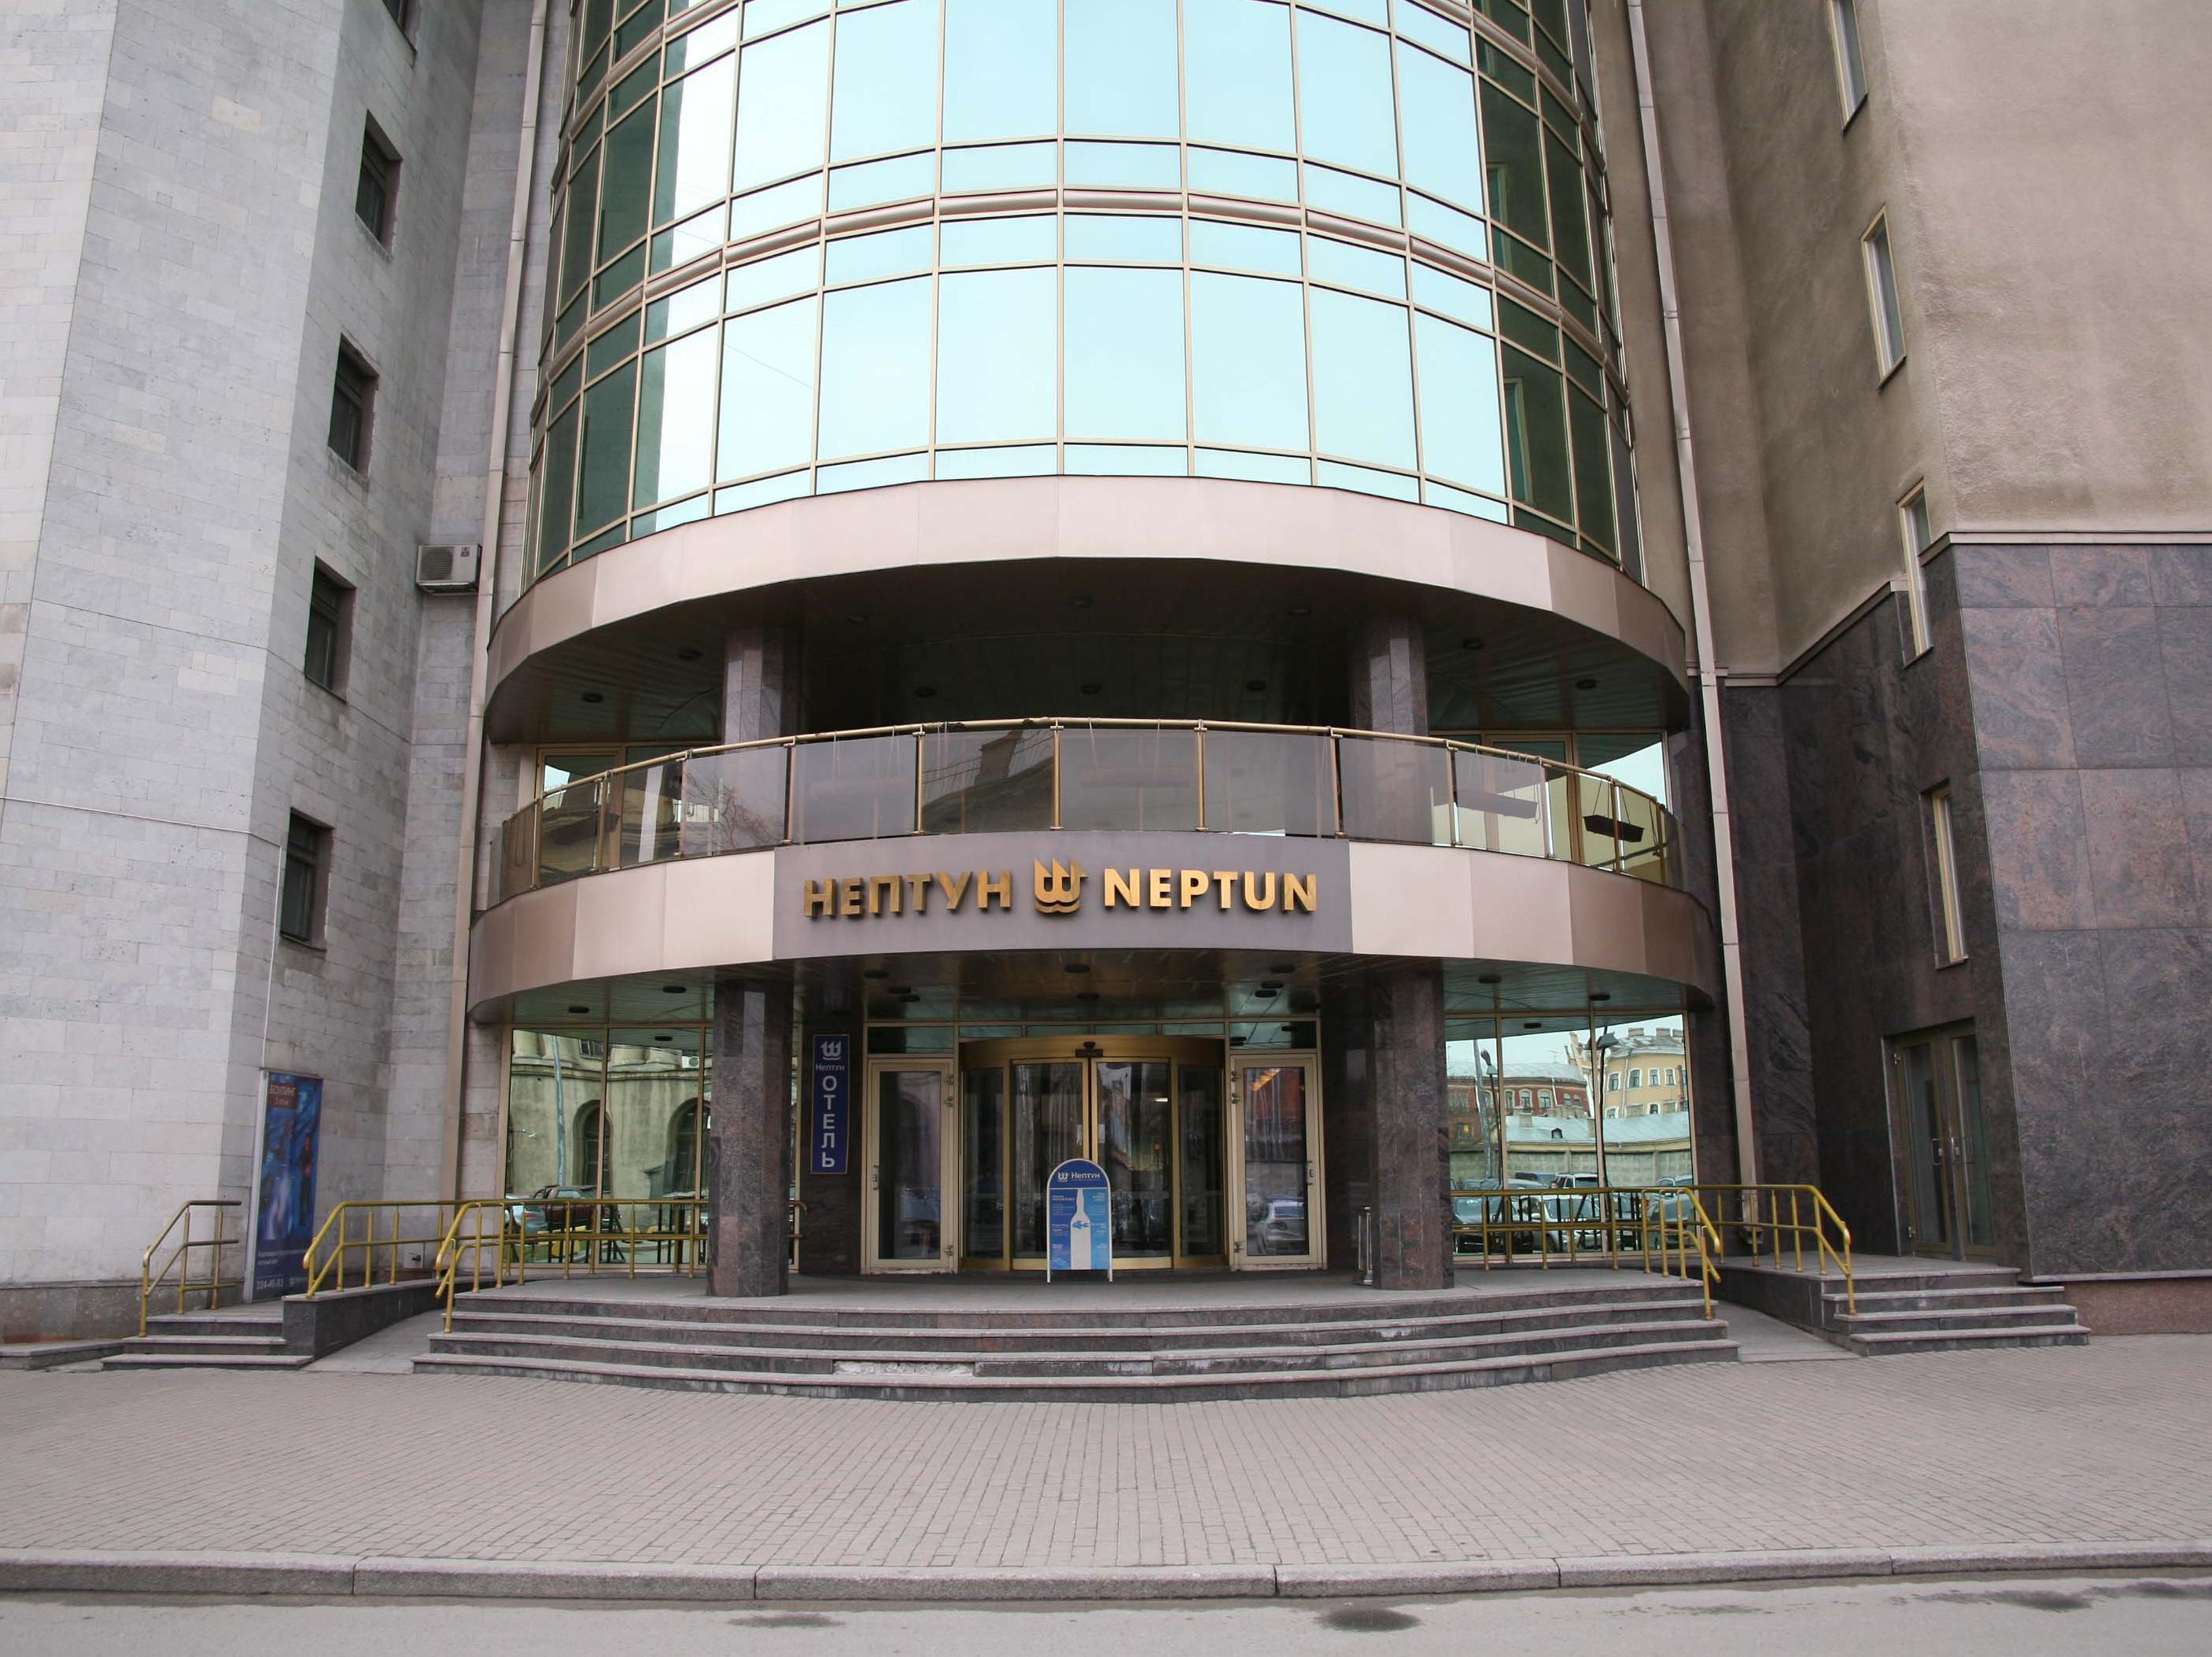 Neptun Business Hotel Russia FAQ 2016, What facilities are there in Neptun Business Hotel Russia 2016, What Languages Spoken are Supported in Neptun Business Hotel Russia 2016, Which payment cards are accepted in Neptun Business Hotel Russia , Russia Neptun Business Hotel room facilities and services Q&A 2016, Russia Neptun Business Hotel online booking services 2016, Russia Neptun Business Hotel address 2016, Russia Neptun Business Hotel telephone number 2016,Russia Neptun Business Hotel map 2016, Russia Neptun Business Hotel traffic guide 2016, how to go Russia Neptun Business Hotel, Russia Neptun Business Hotel booking online 2016, Russia Neptun Business Hotel room types 2016.